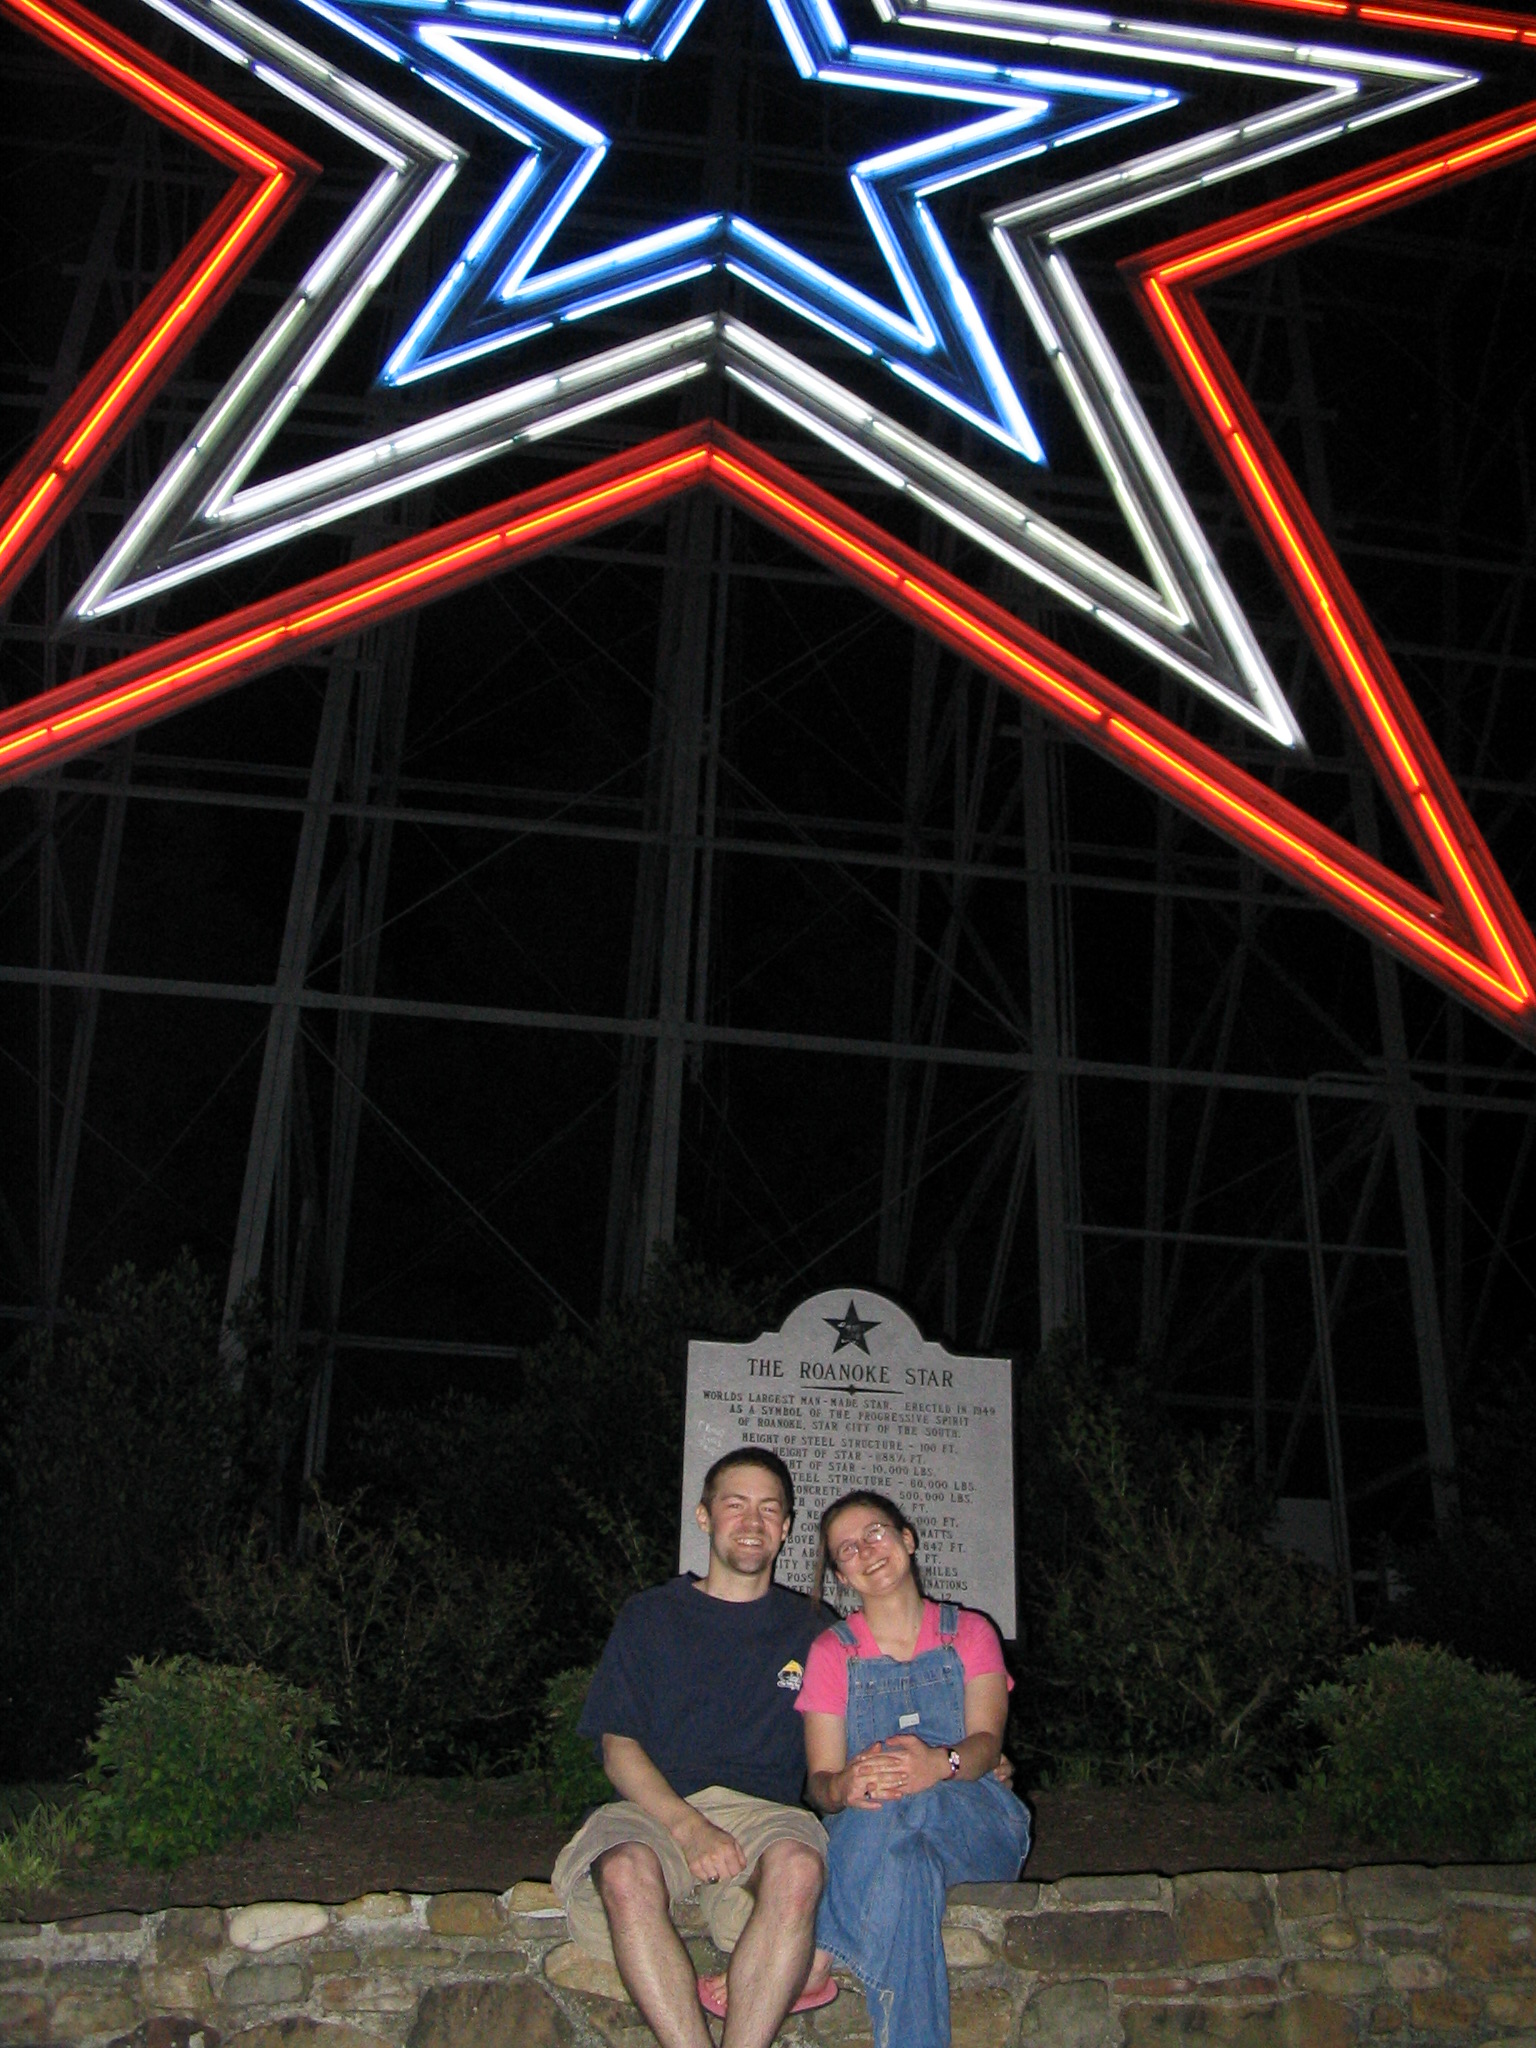 The Roanoke Star and Erin and Hunter